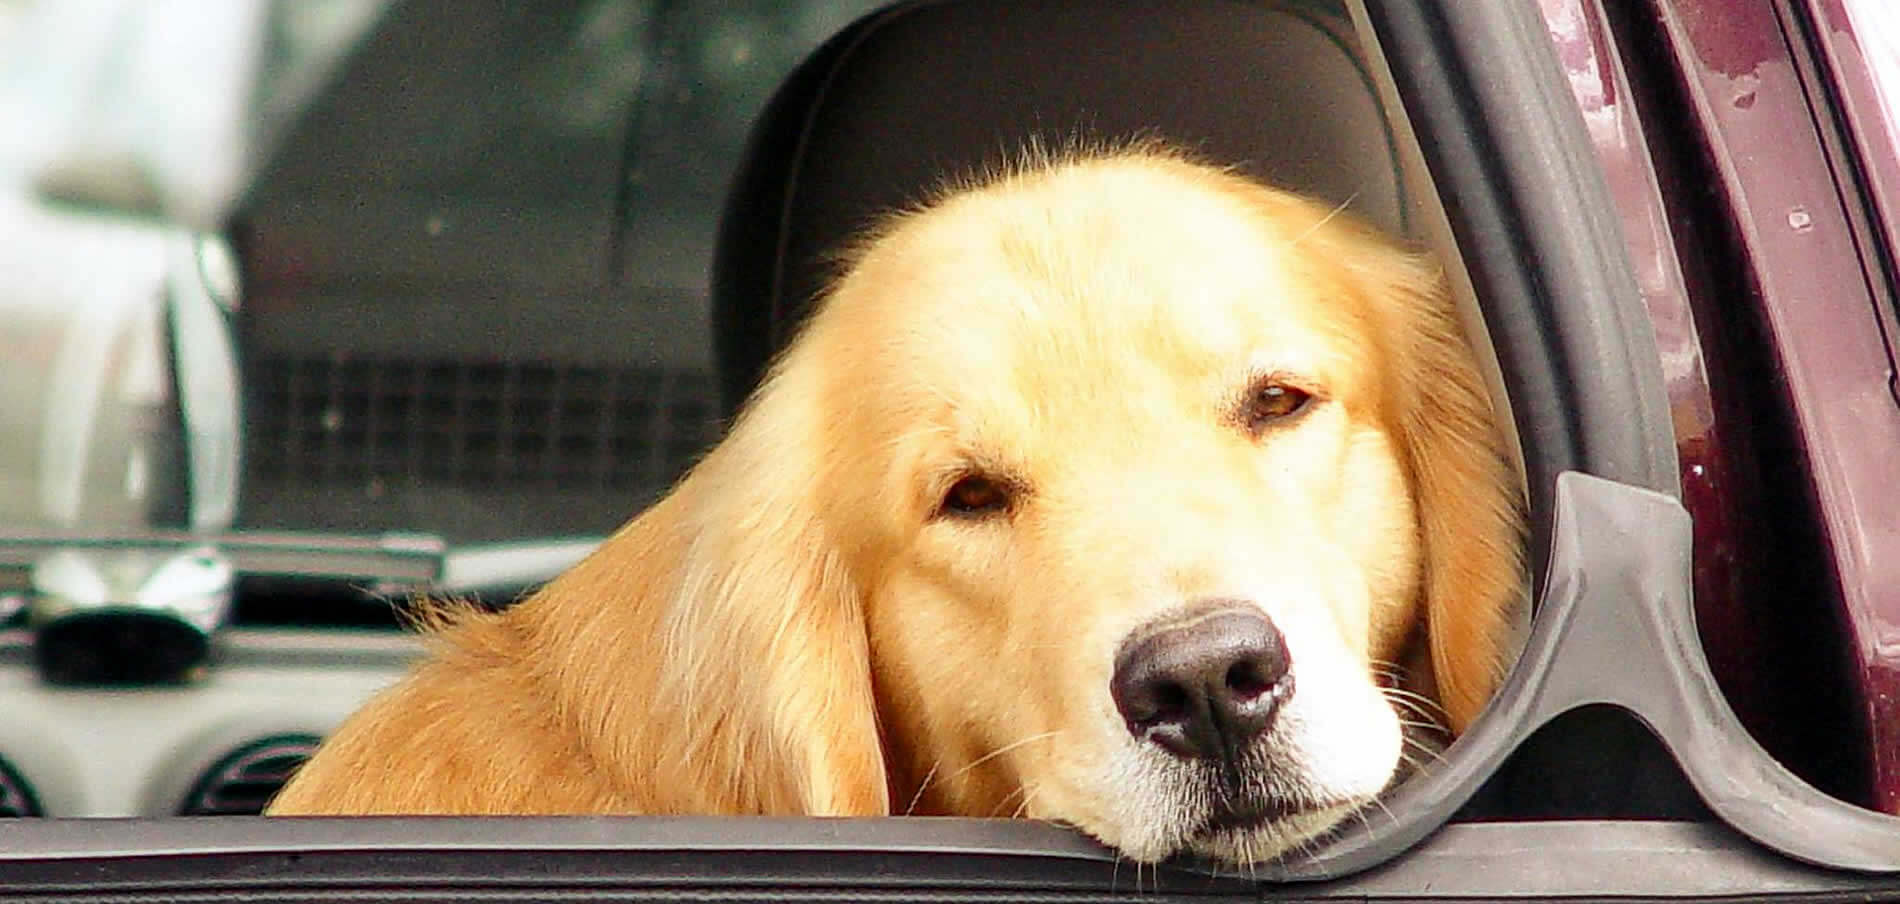 Sad Golden Retriever looking out of Maroon Car Window